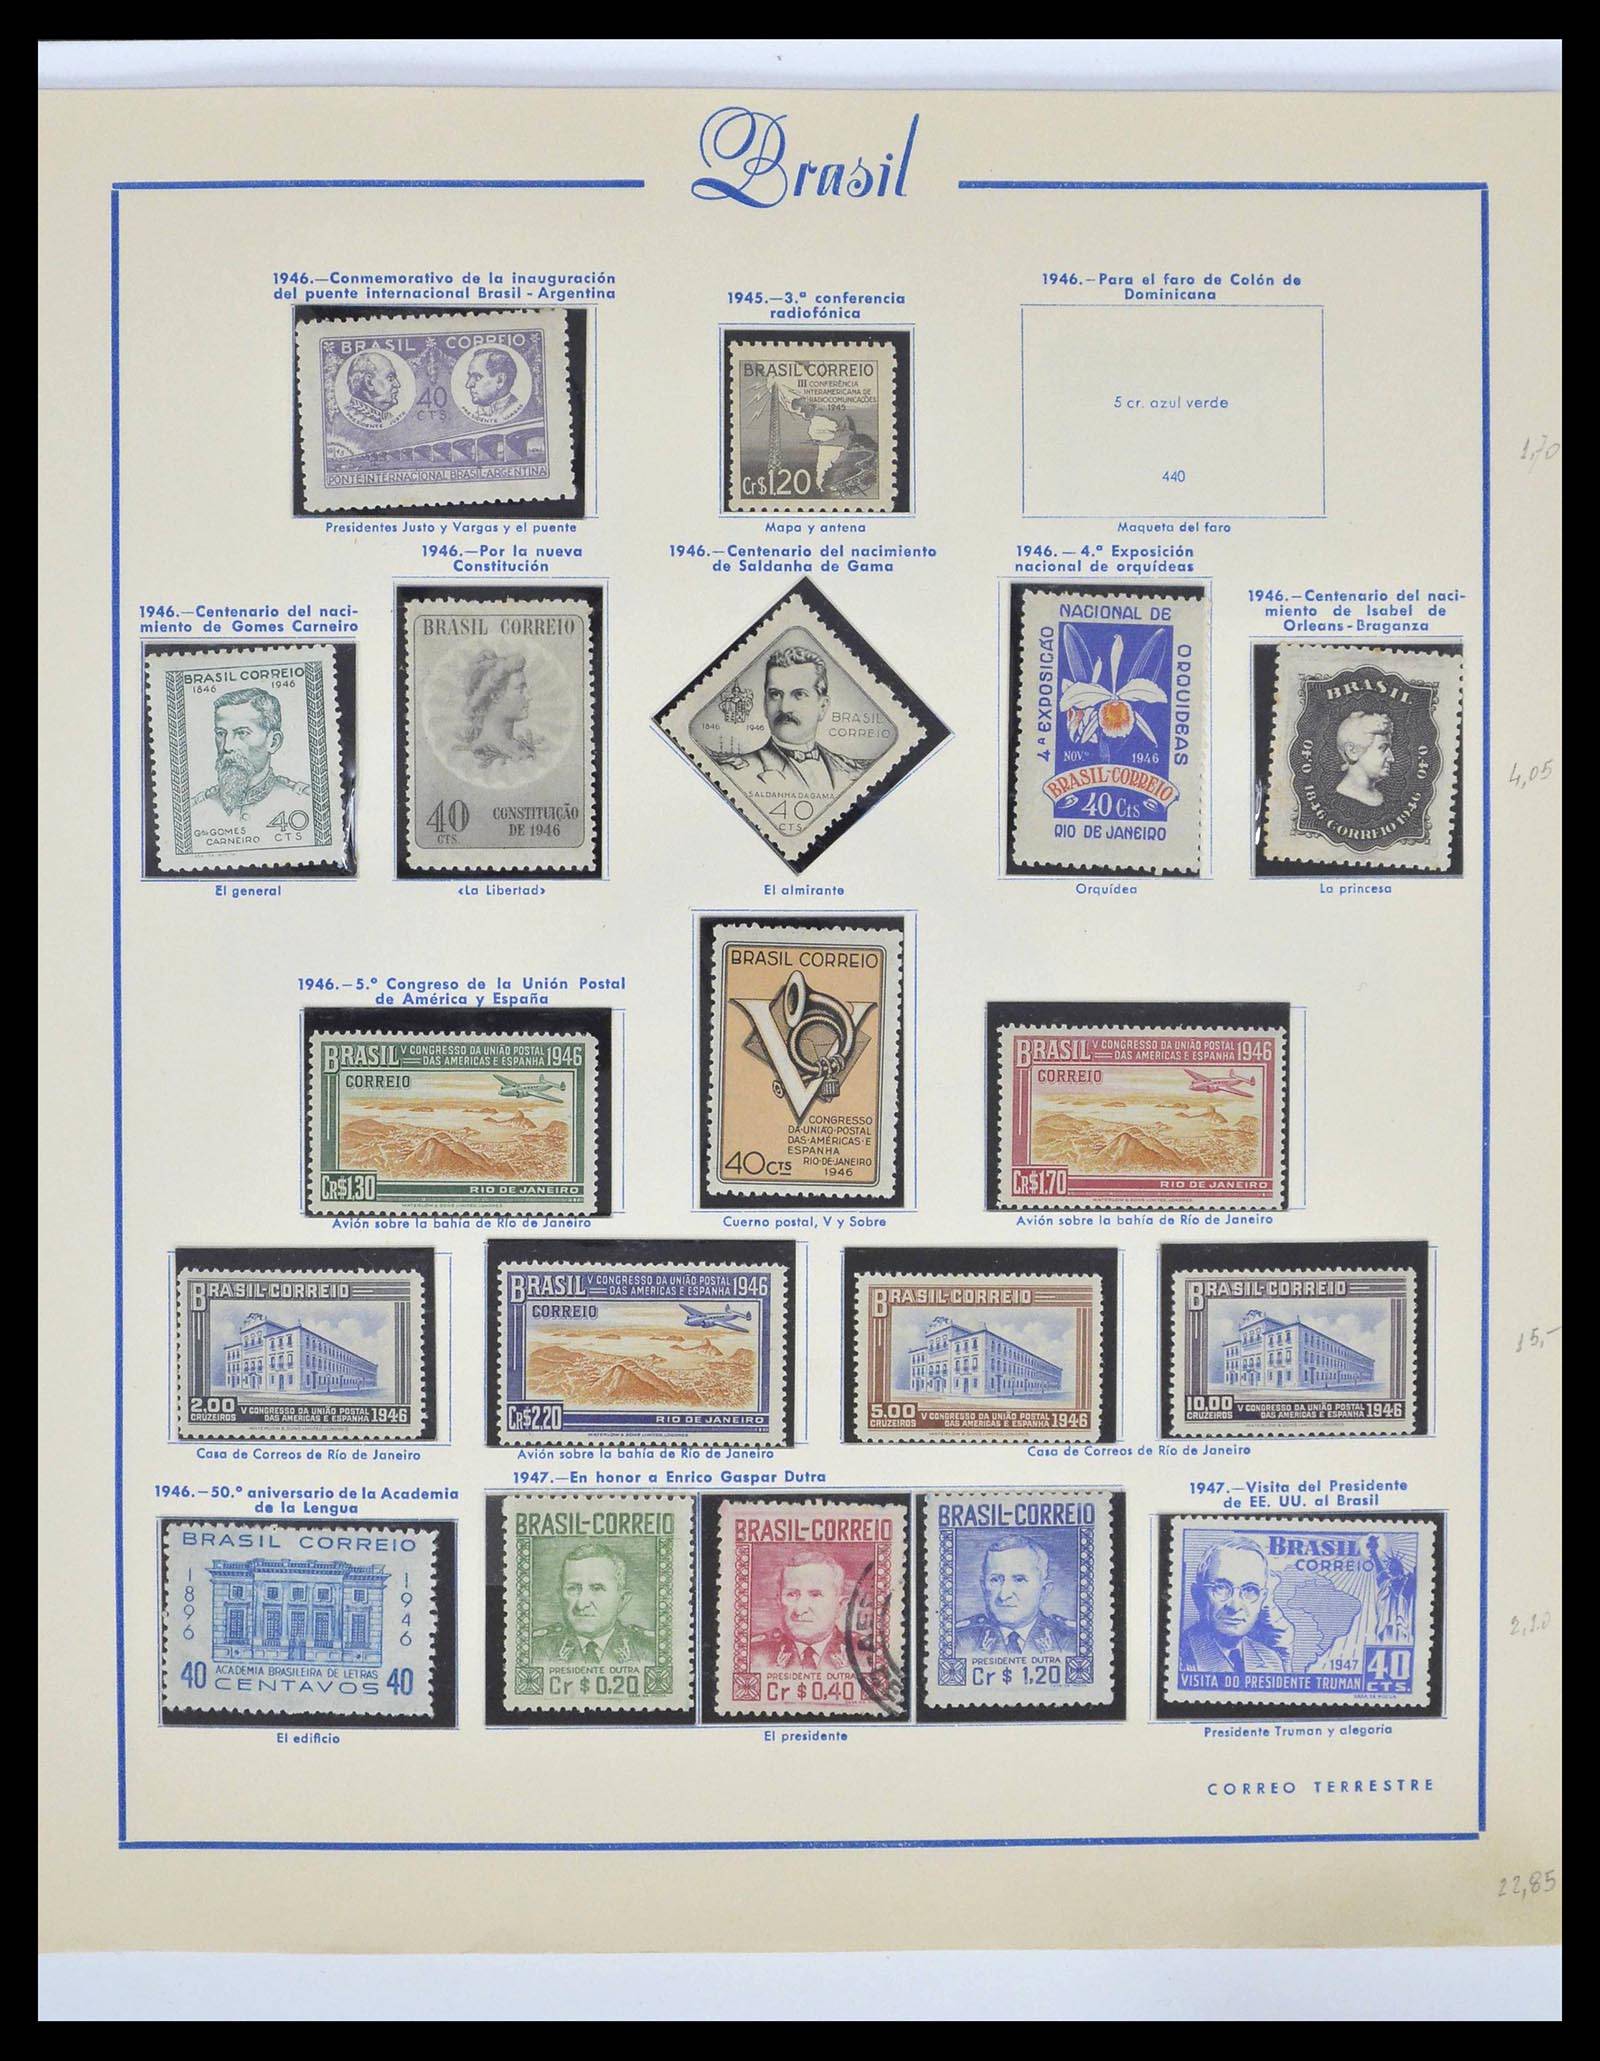 39245 0027 - Stamp collection 39245 Brazil 1843-1968.